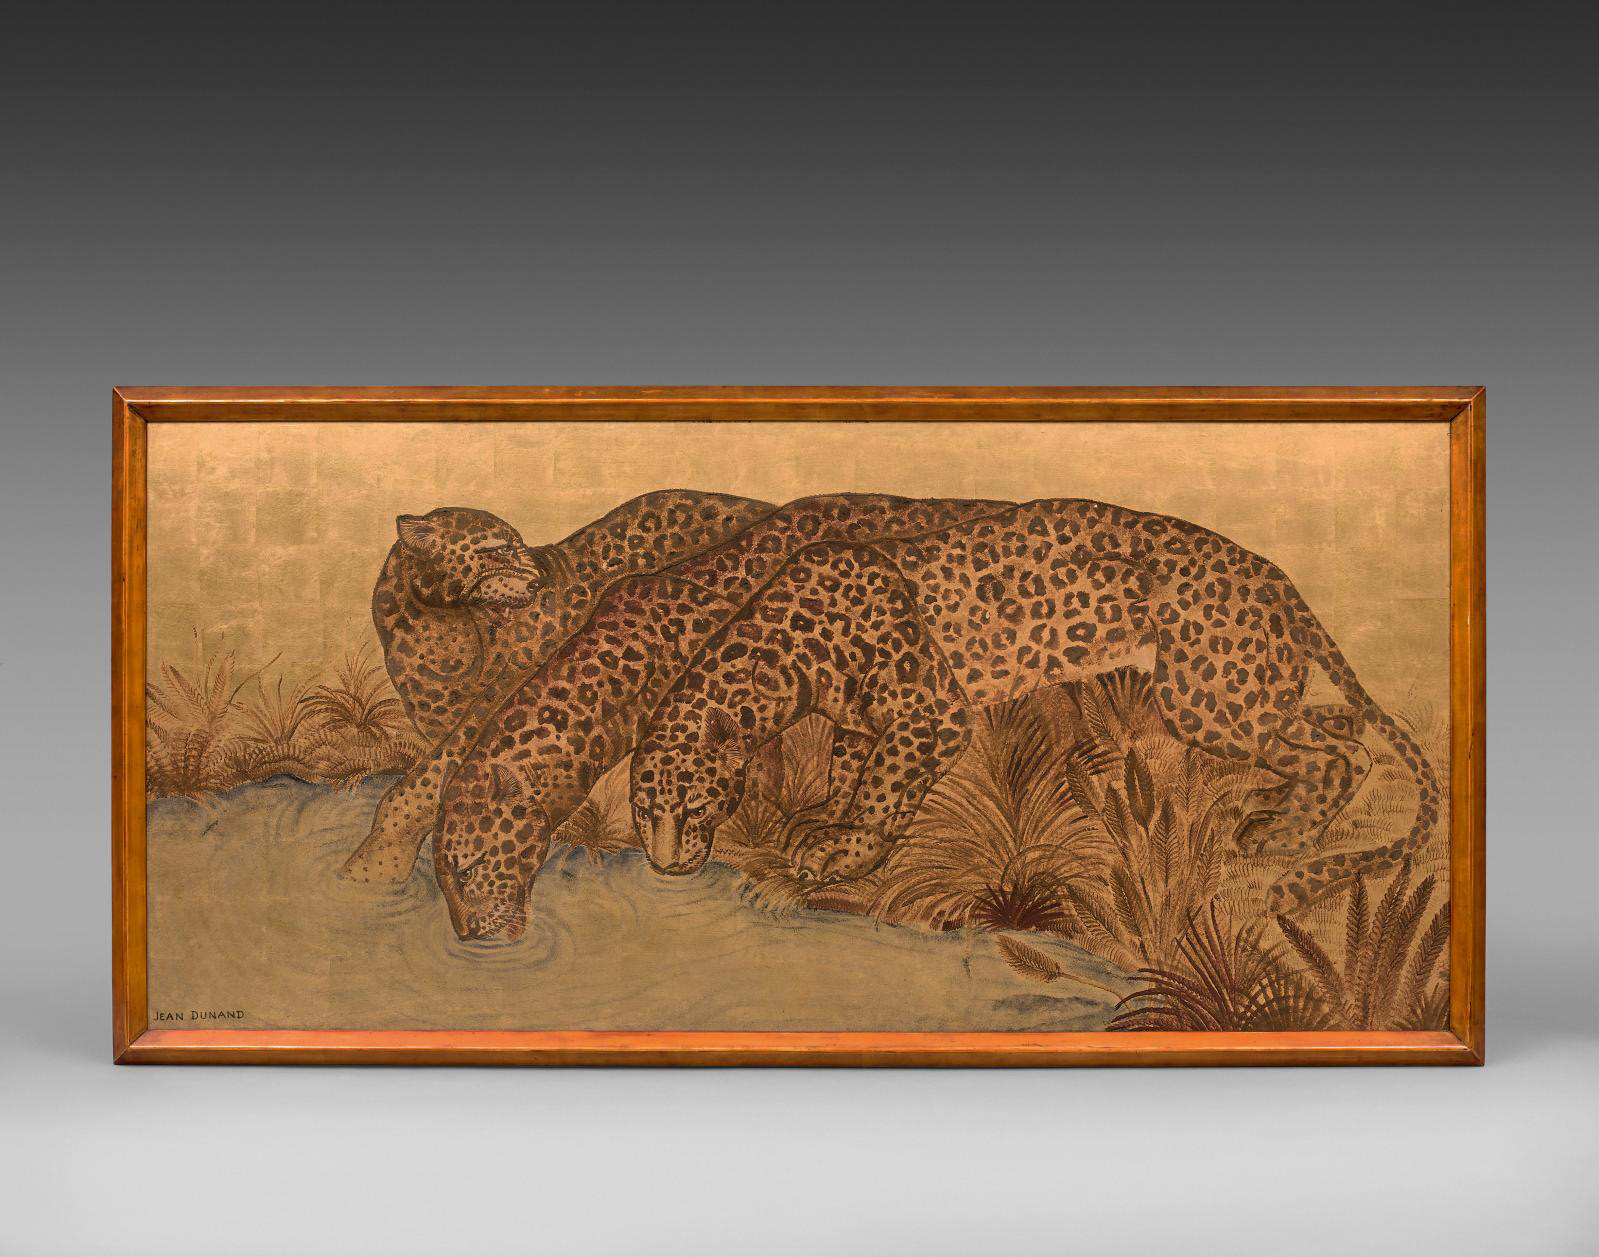 Jean Dunand (1877-1942), Trois léopards s’abreuvant (Three Leopards Drinking), c. 1930, panel in brown and blue lacquer on a plain gold leaf background, original frame in fawn lacquer, 78 x 166 cm/30.7 x 65.4 in (87 x 175 cm/34.3 x 68.9 in with frame). Estimate: €60,000/80,000